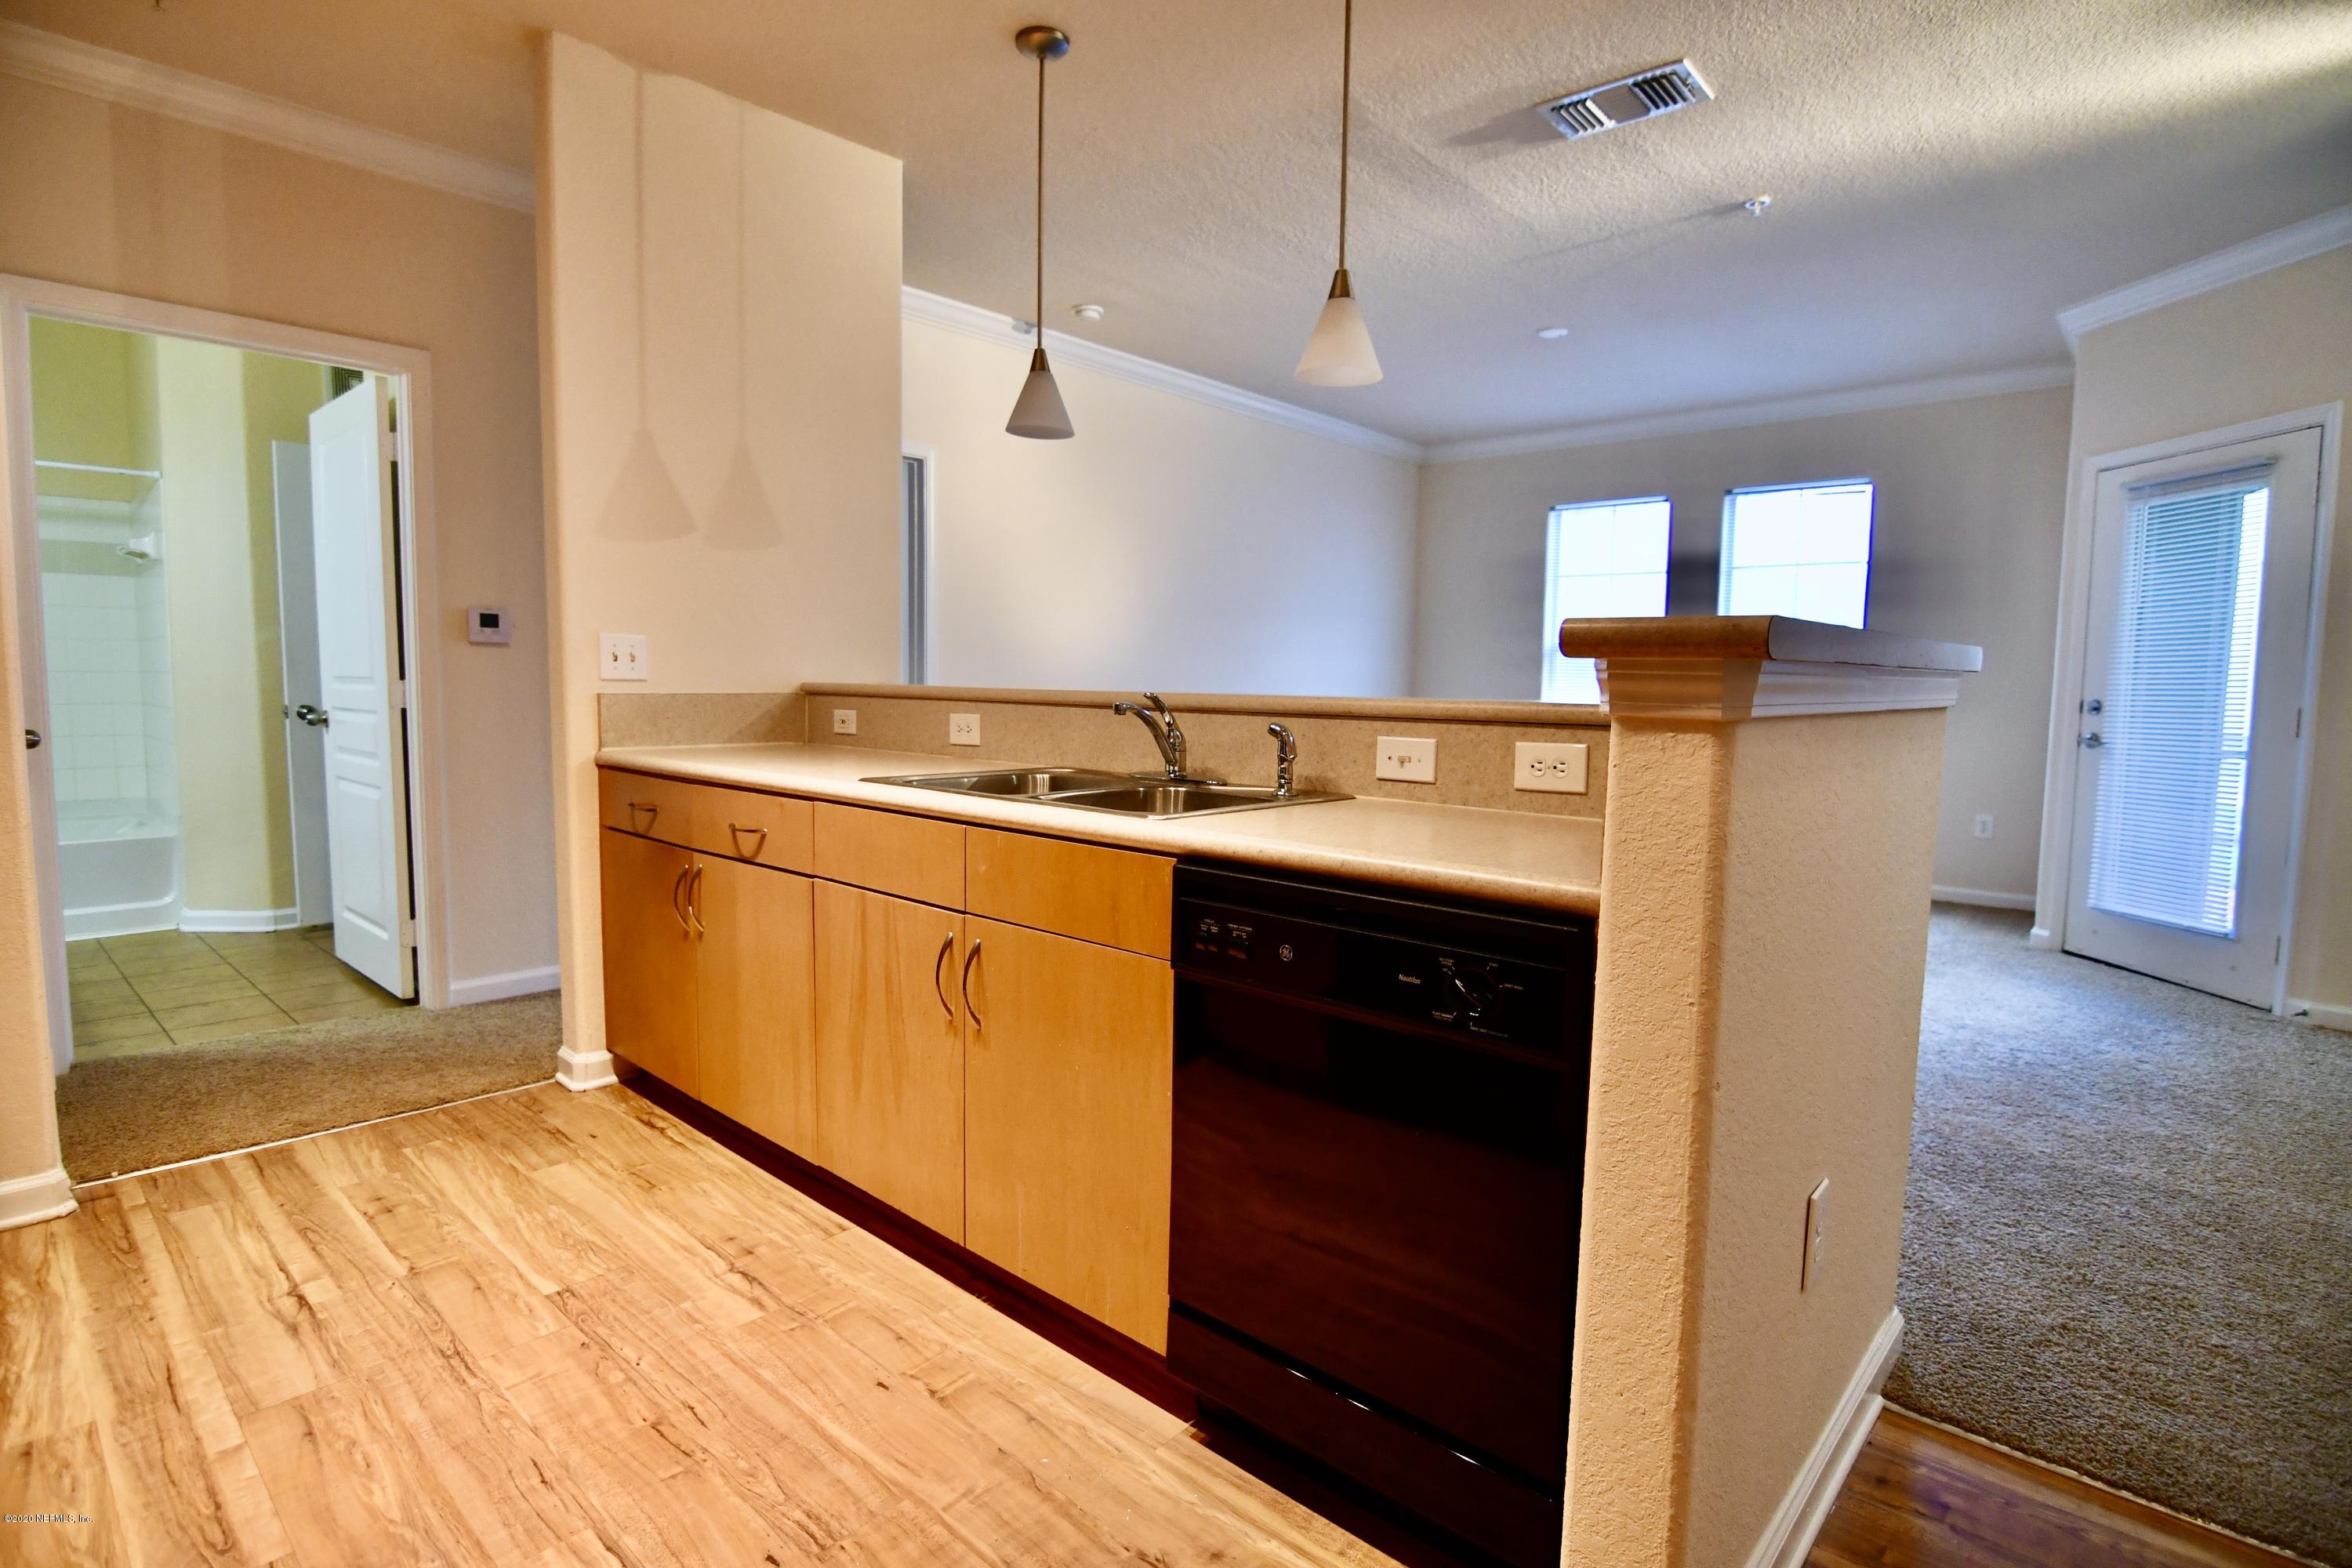 a kitchen with kitchen island a stove a refrigerator and a wooden floor